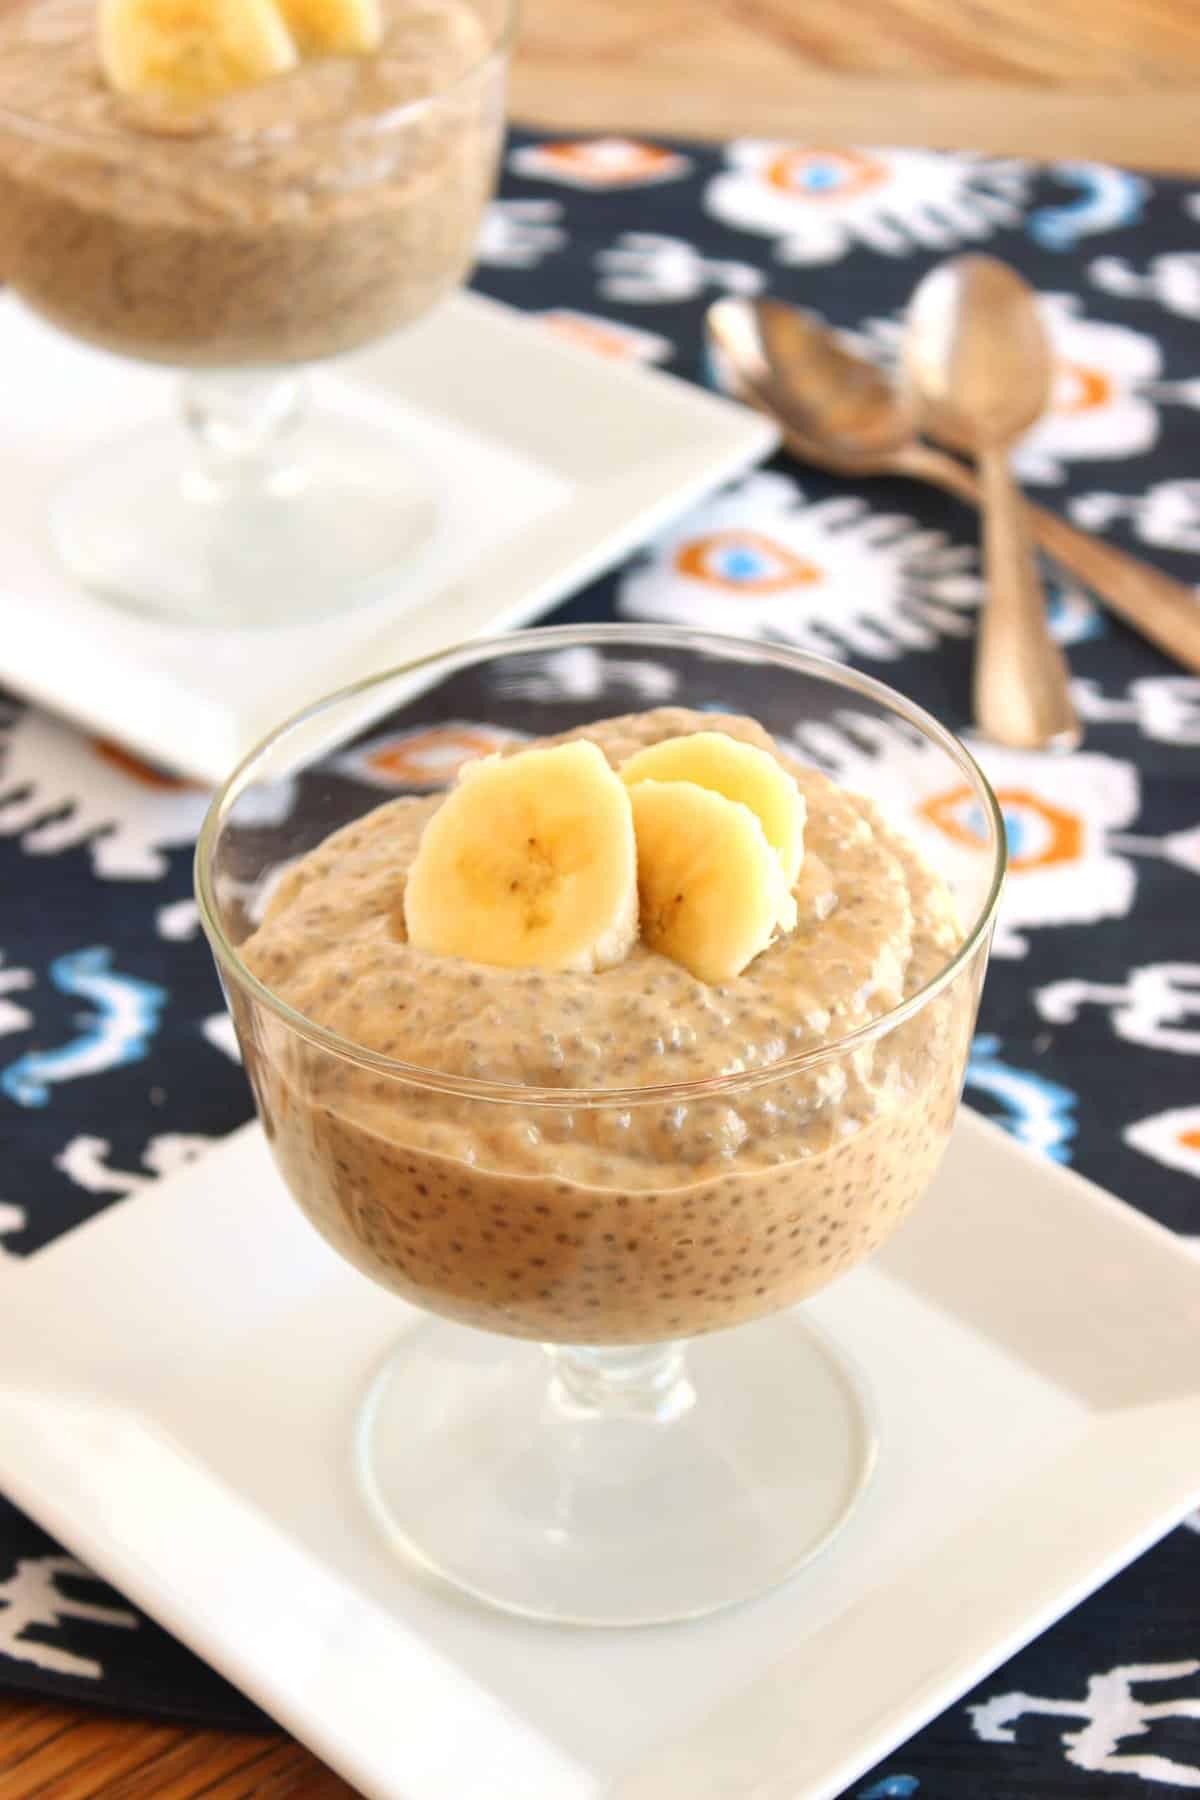 Banana Peanut Butter Chia Seed Pudding in a footed dessert bowl.